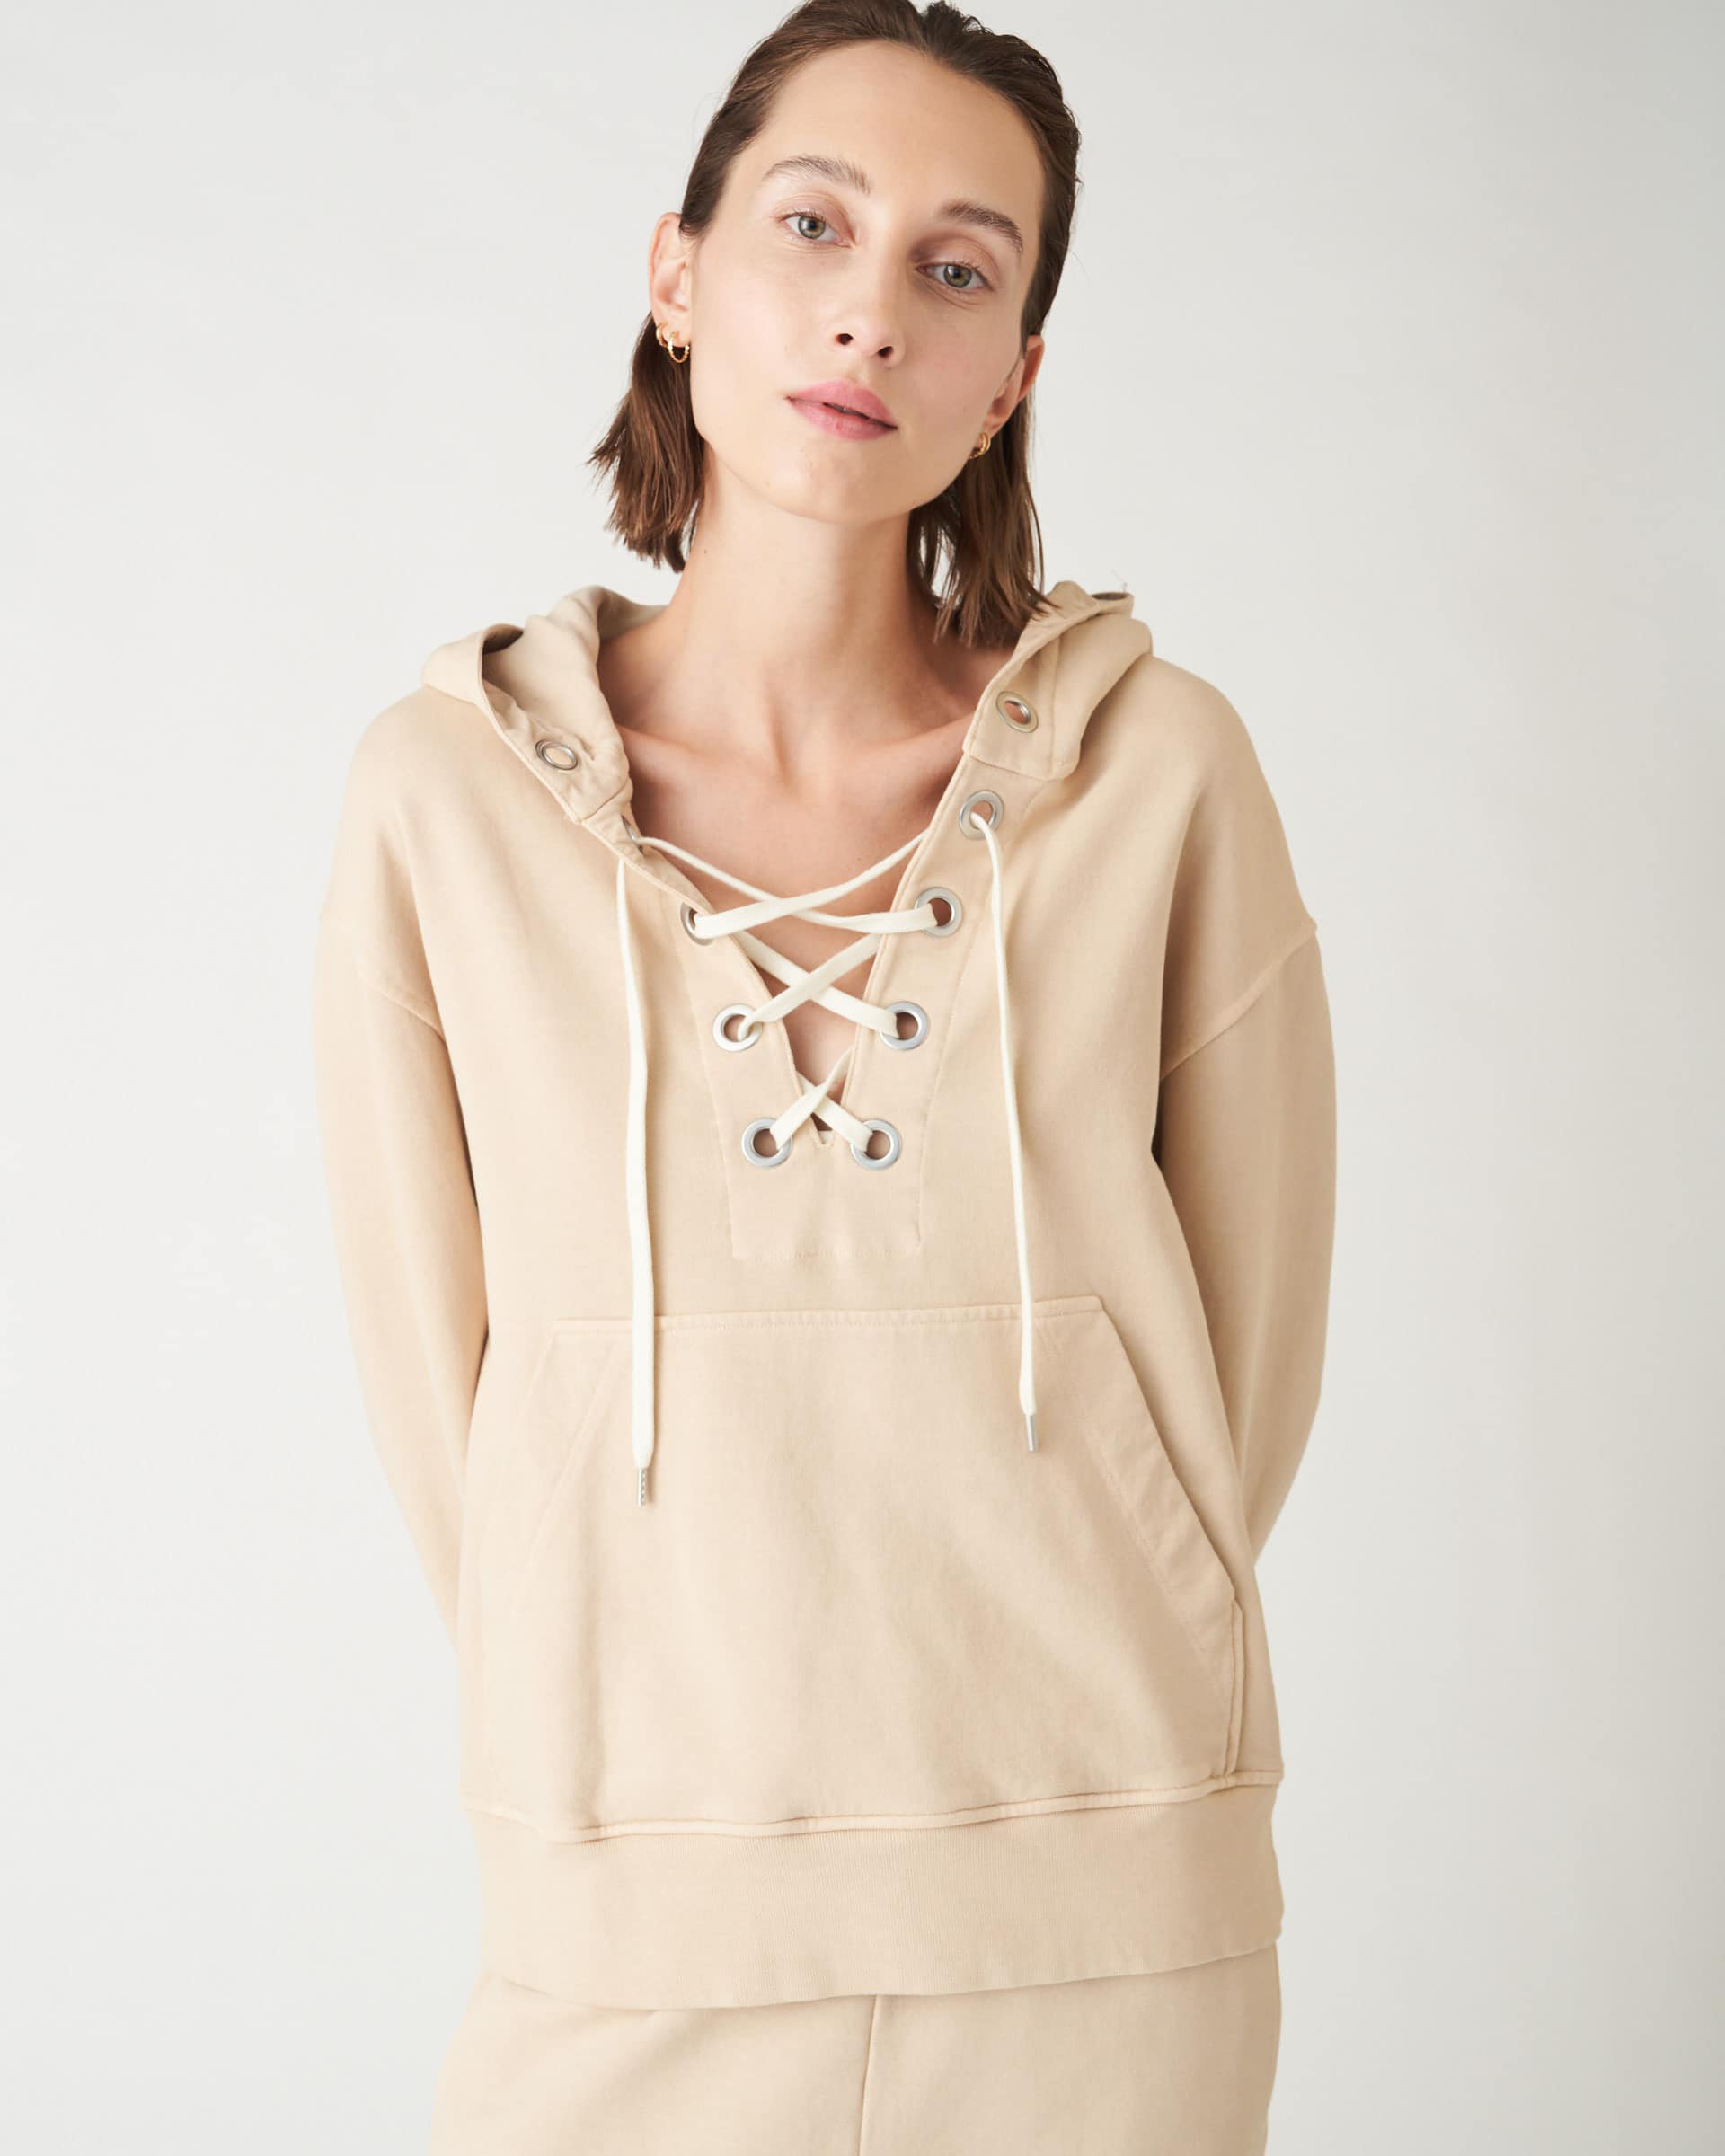 The Market Store | Hooded Sweatshirt With Sails